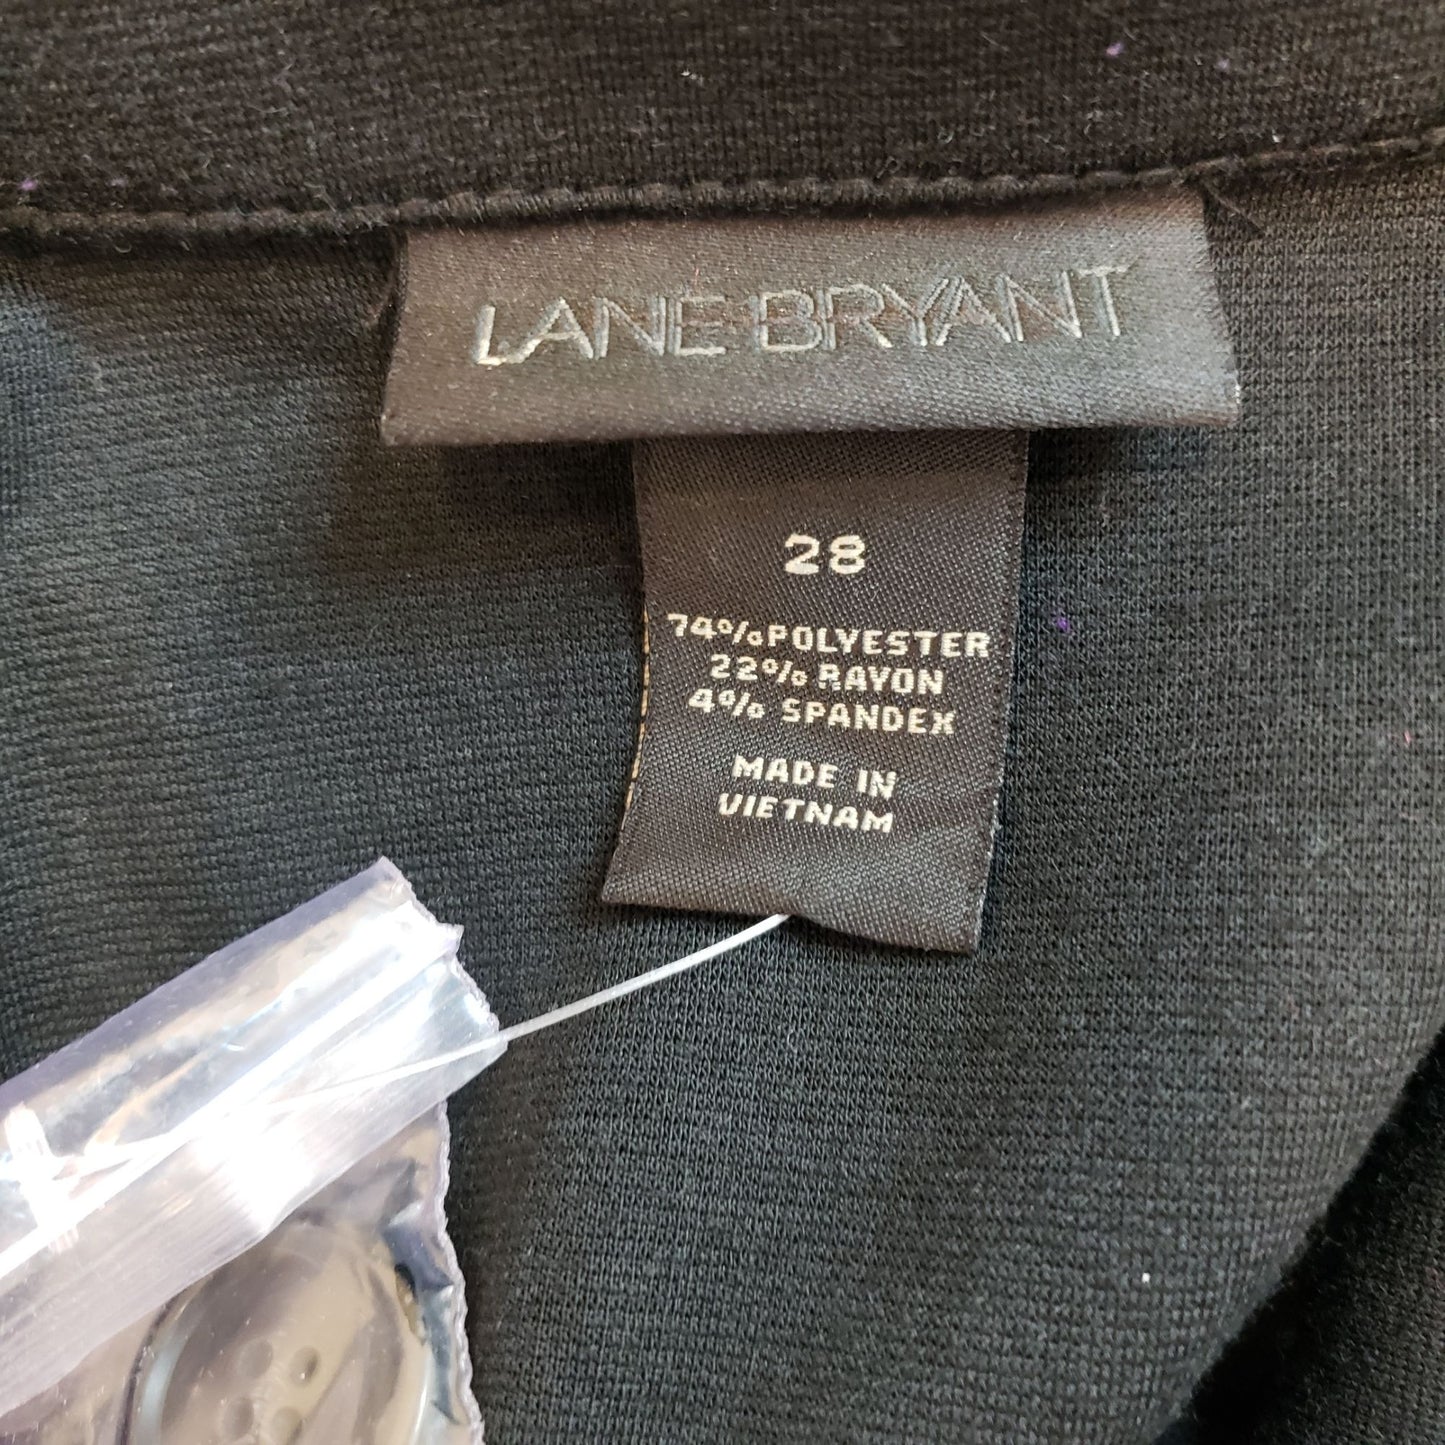 NWOT Lane Bryant Jersey Style Button Front Belted Jacket Size 28